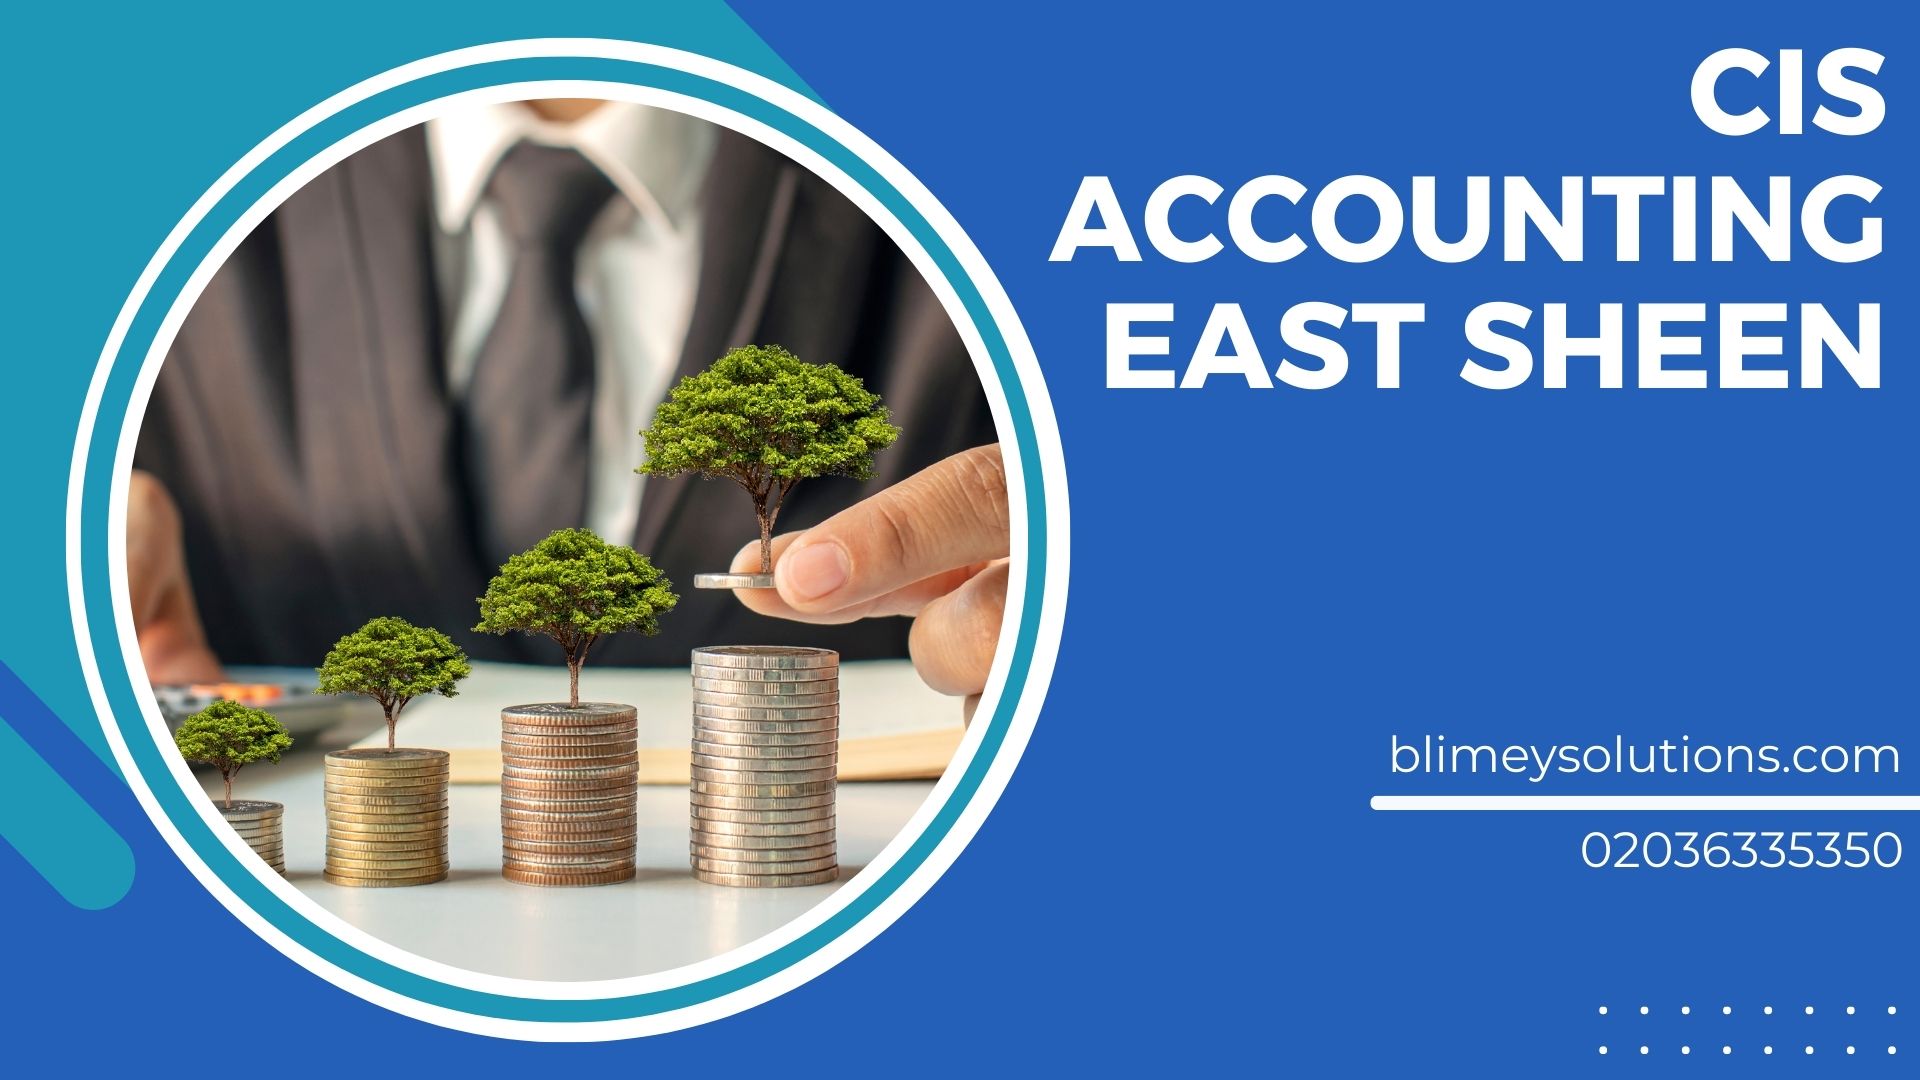 CIS Accounting in East Sheen SW14 London